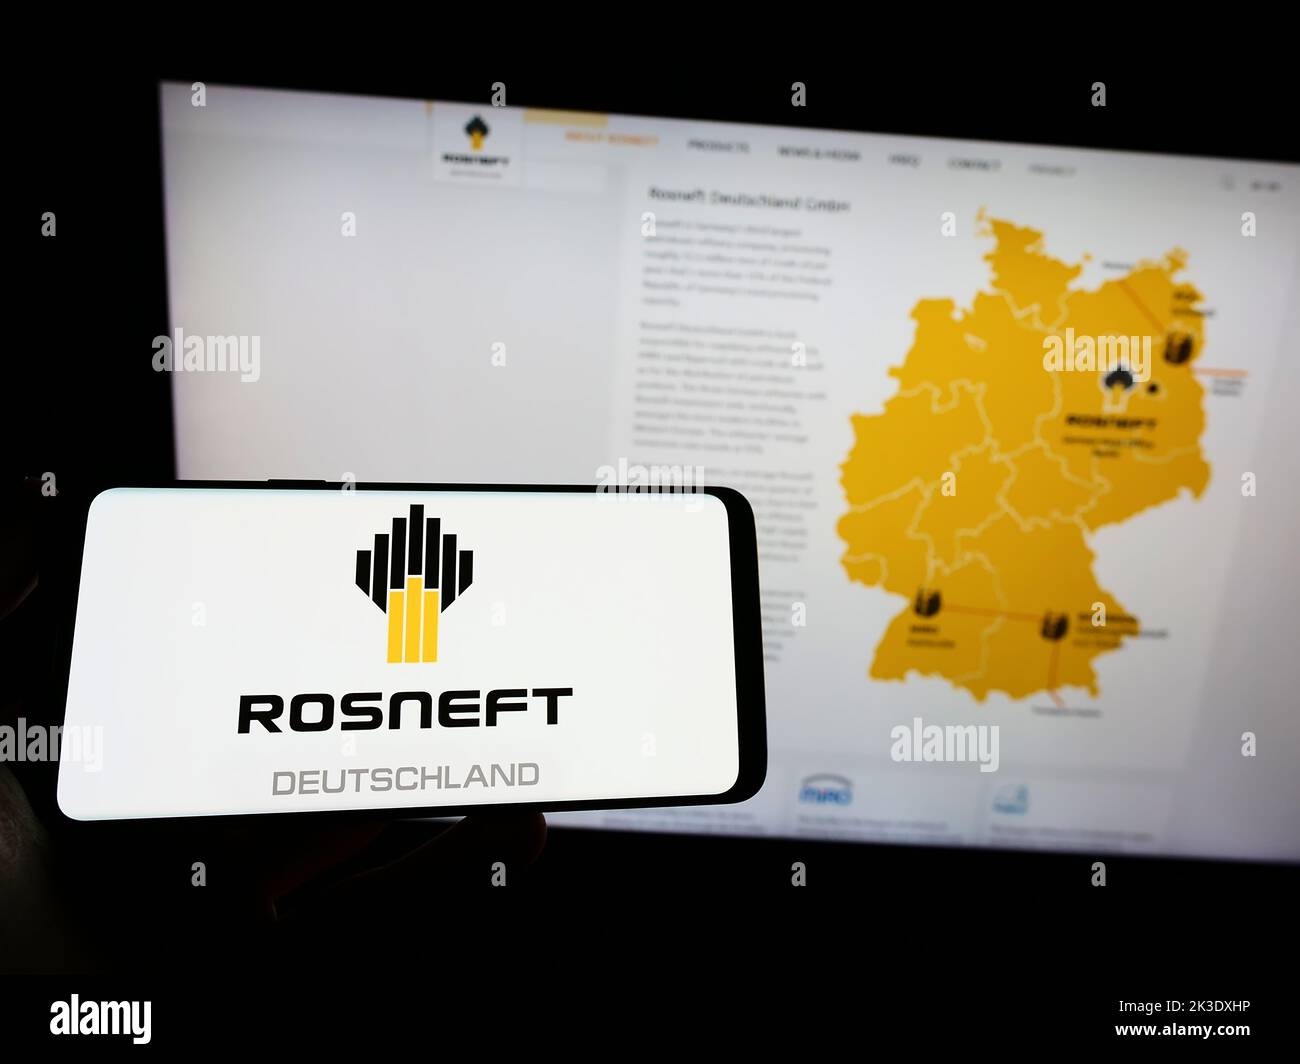 Person holding smartphone with logo of oil refining company Rosneft Deutschland GmbH on screen in front of website. Focus on phone display. Stock Photo